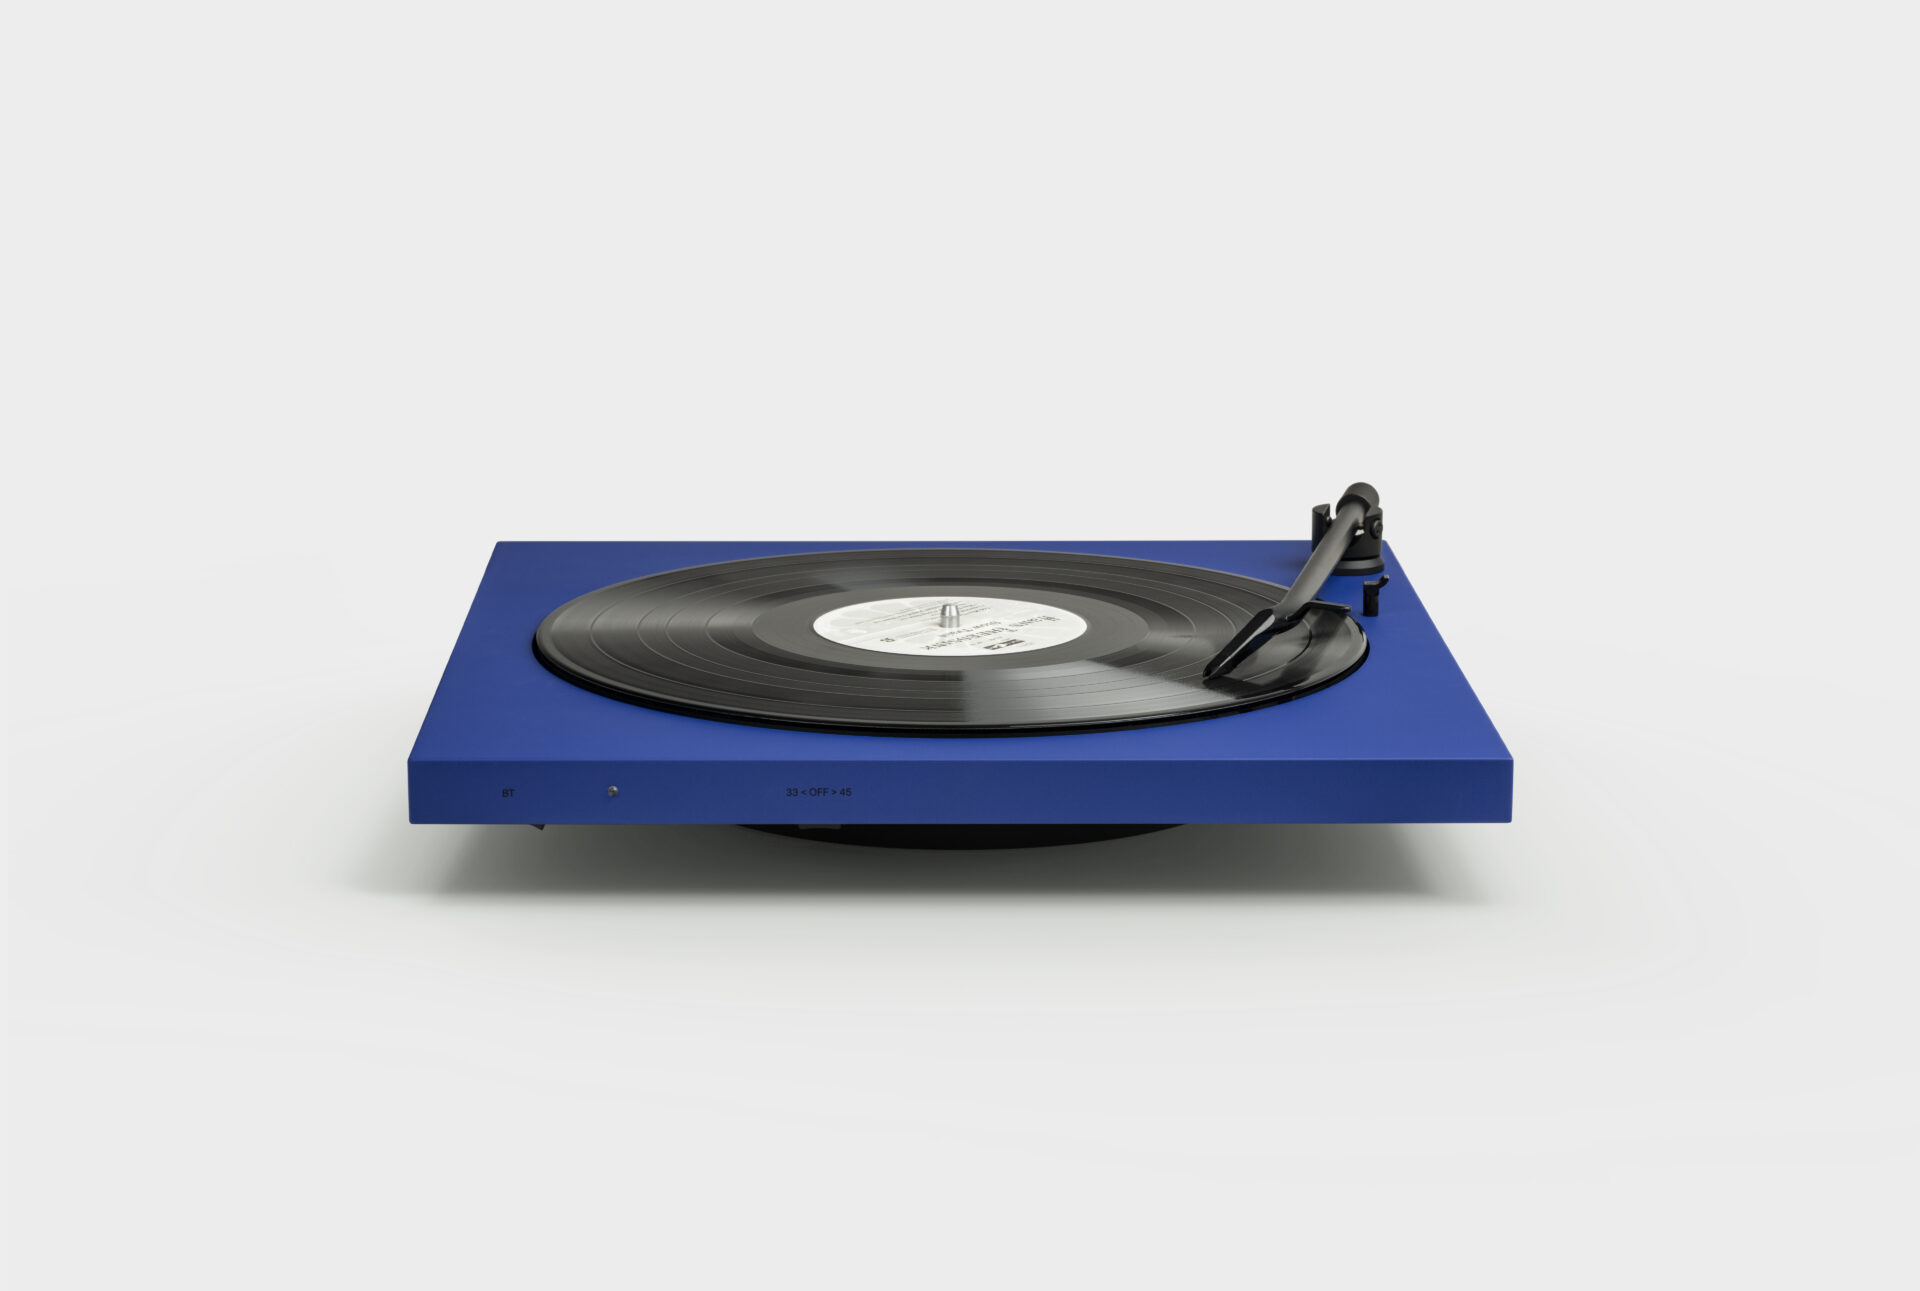 Ultramarine blue colored TONE record player displayed from the frontside